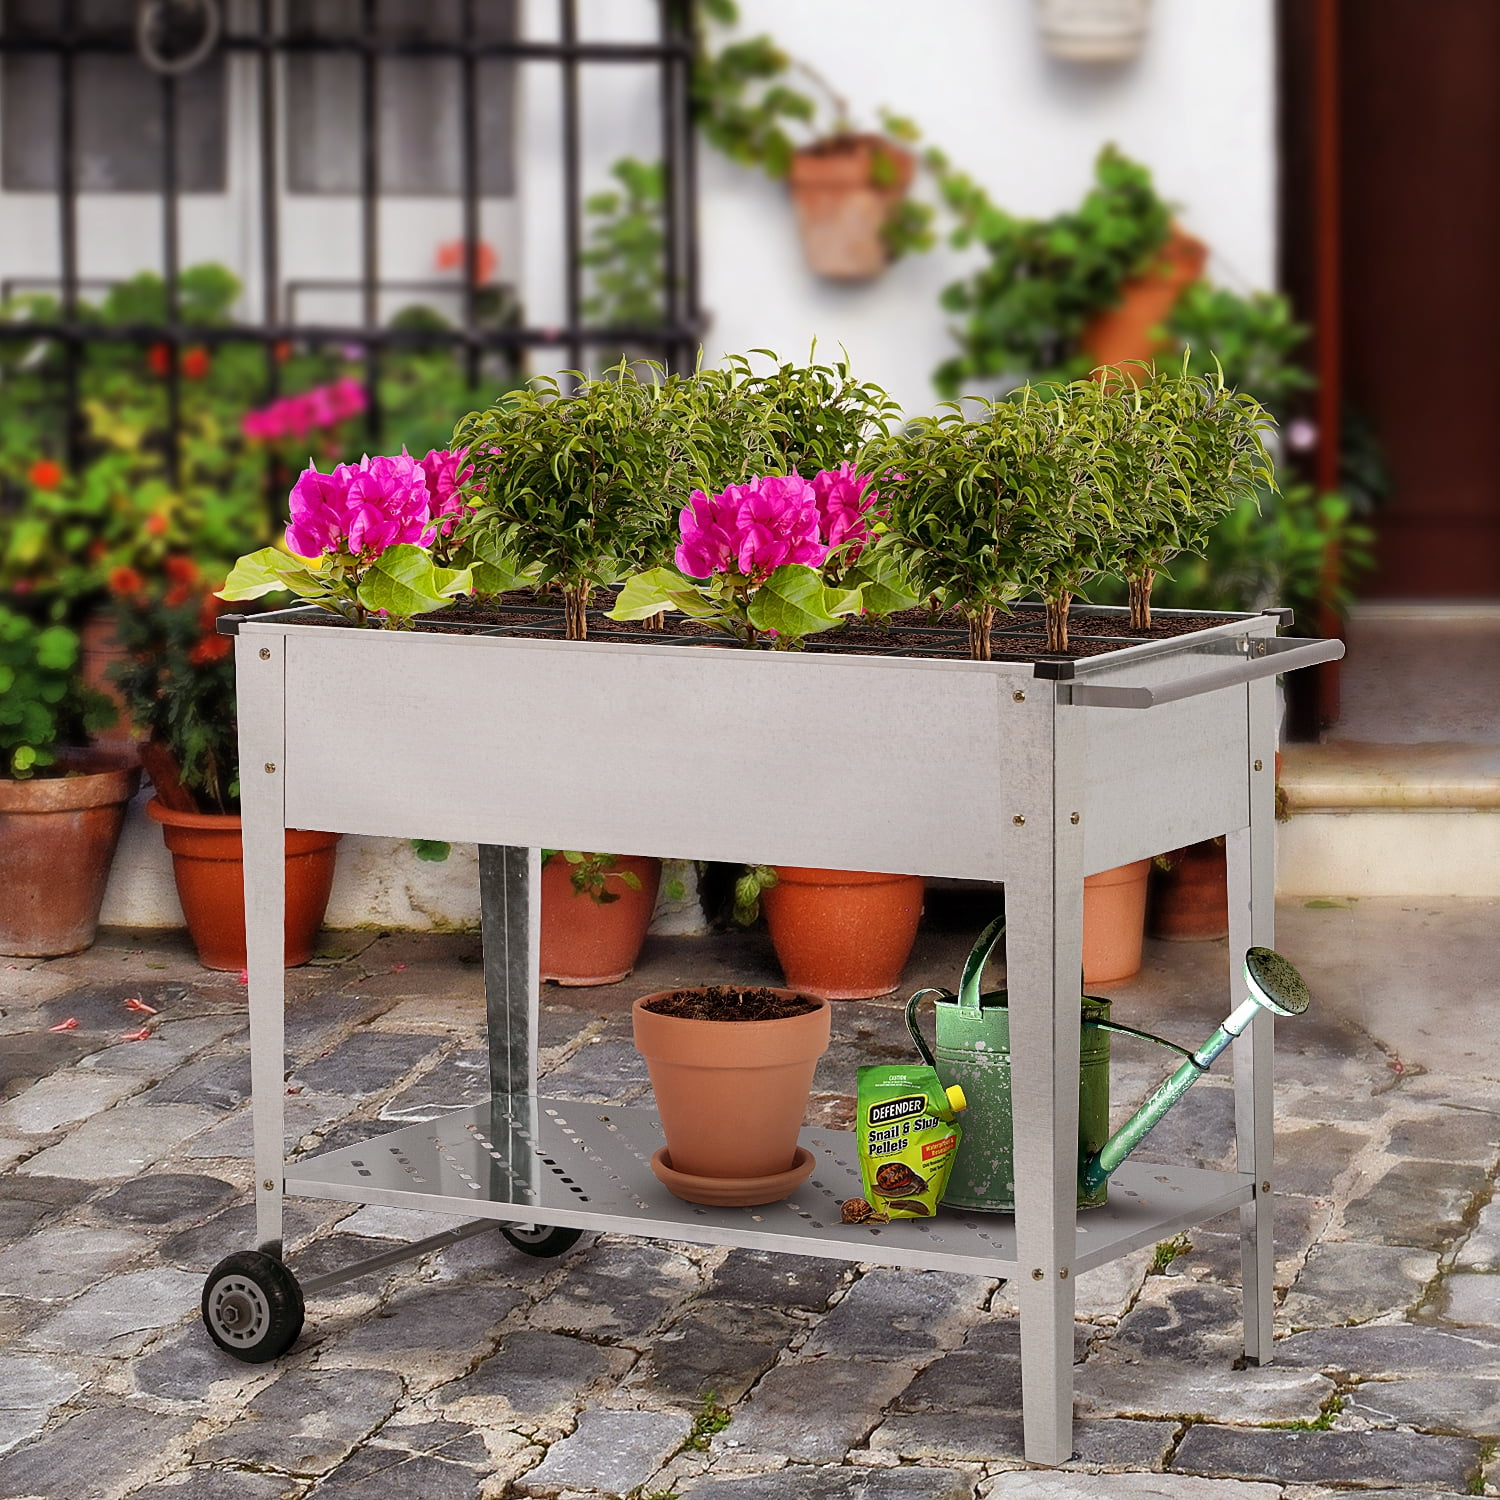 Outdoor Mobile Elevated Planter Box Cart Grow Vegetables and Plants on The Patio Sunnydaze Raised Garden Bed with Handlebar and Wheels Galvanized Steel or Yard Black Deck 43-Inch 